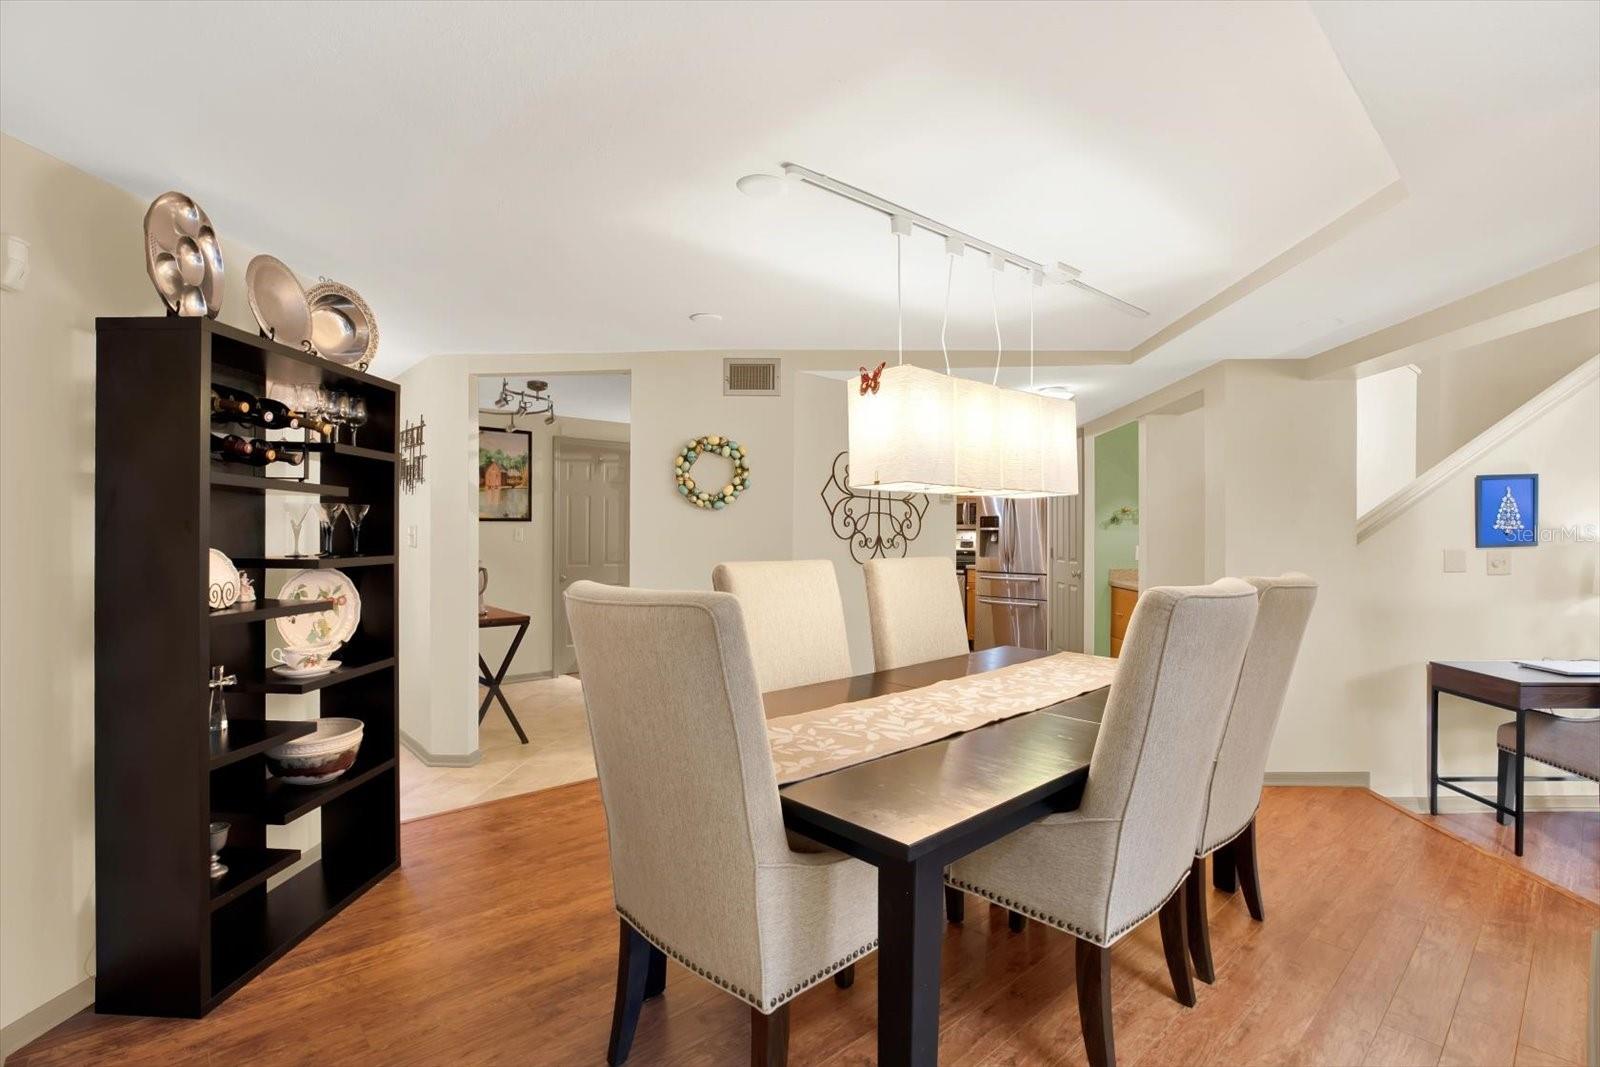 Spacious dining room. Perfect place for family gatherings.